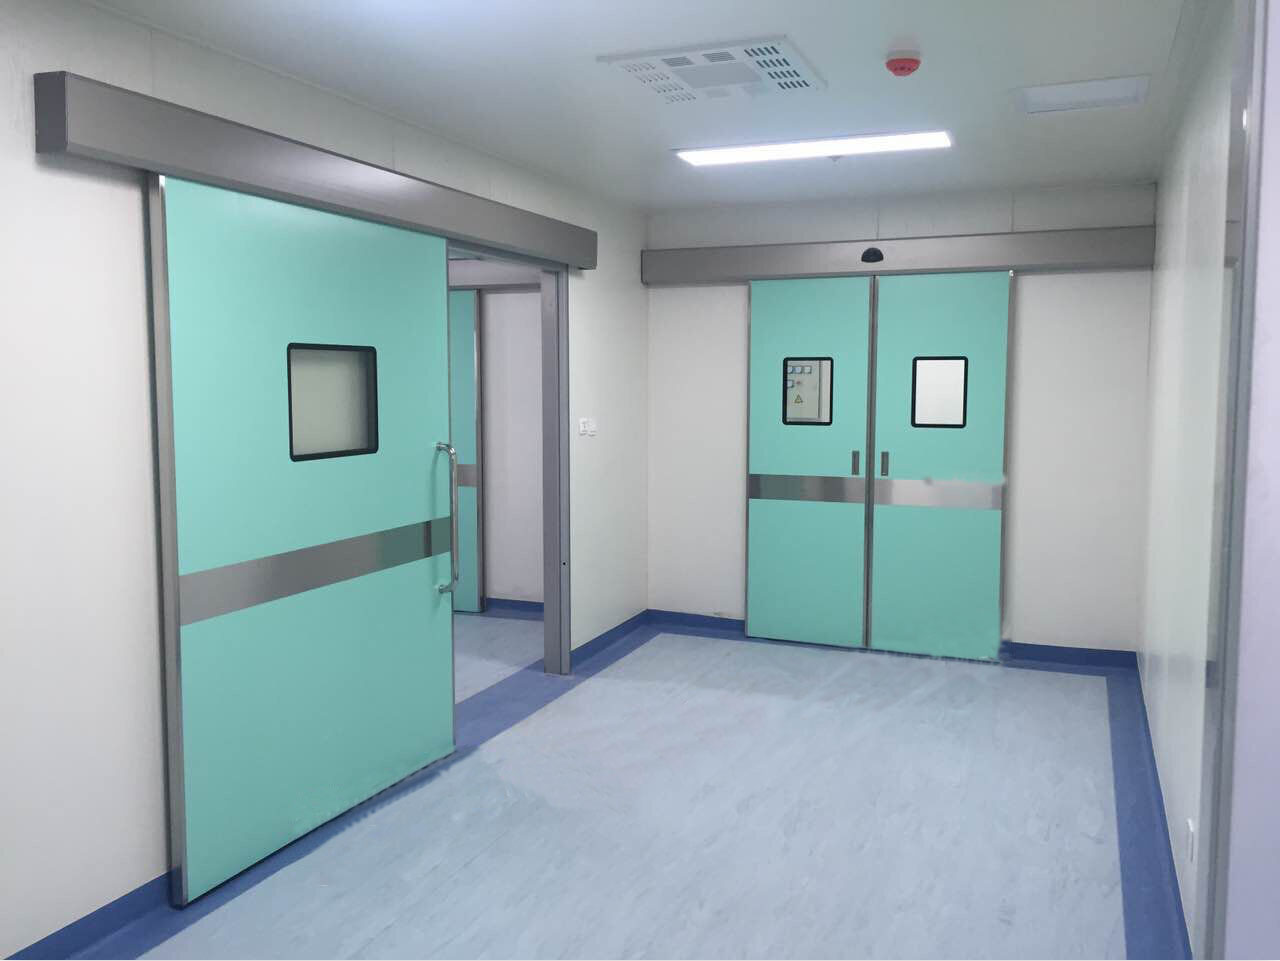 Hermetic Automatic Sliding Door for Operation Room